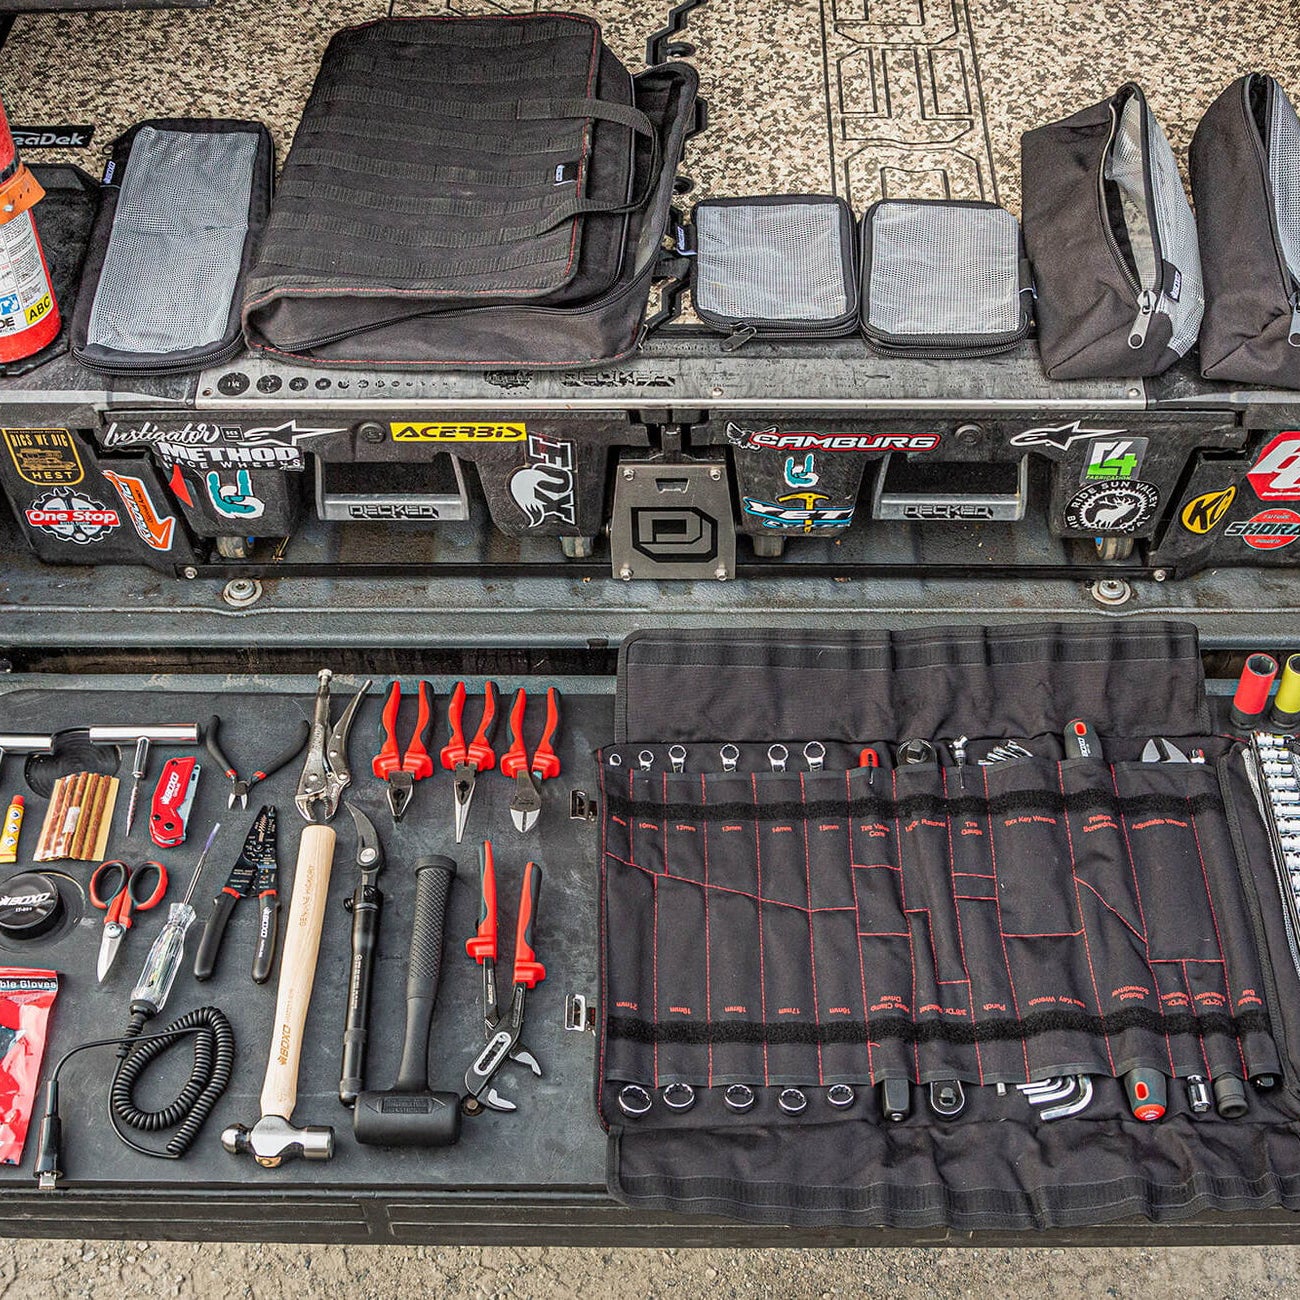 The Decked x Boxo Off-Road Tool Bag Is the Best Kit for Your 4x4